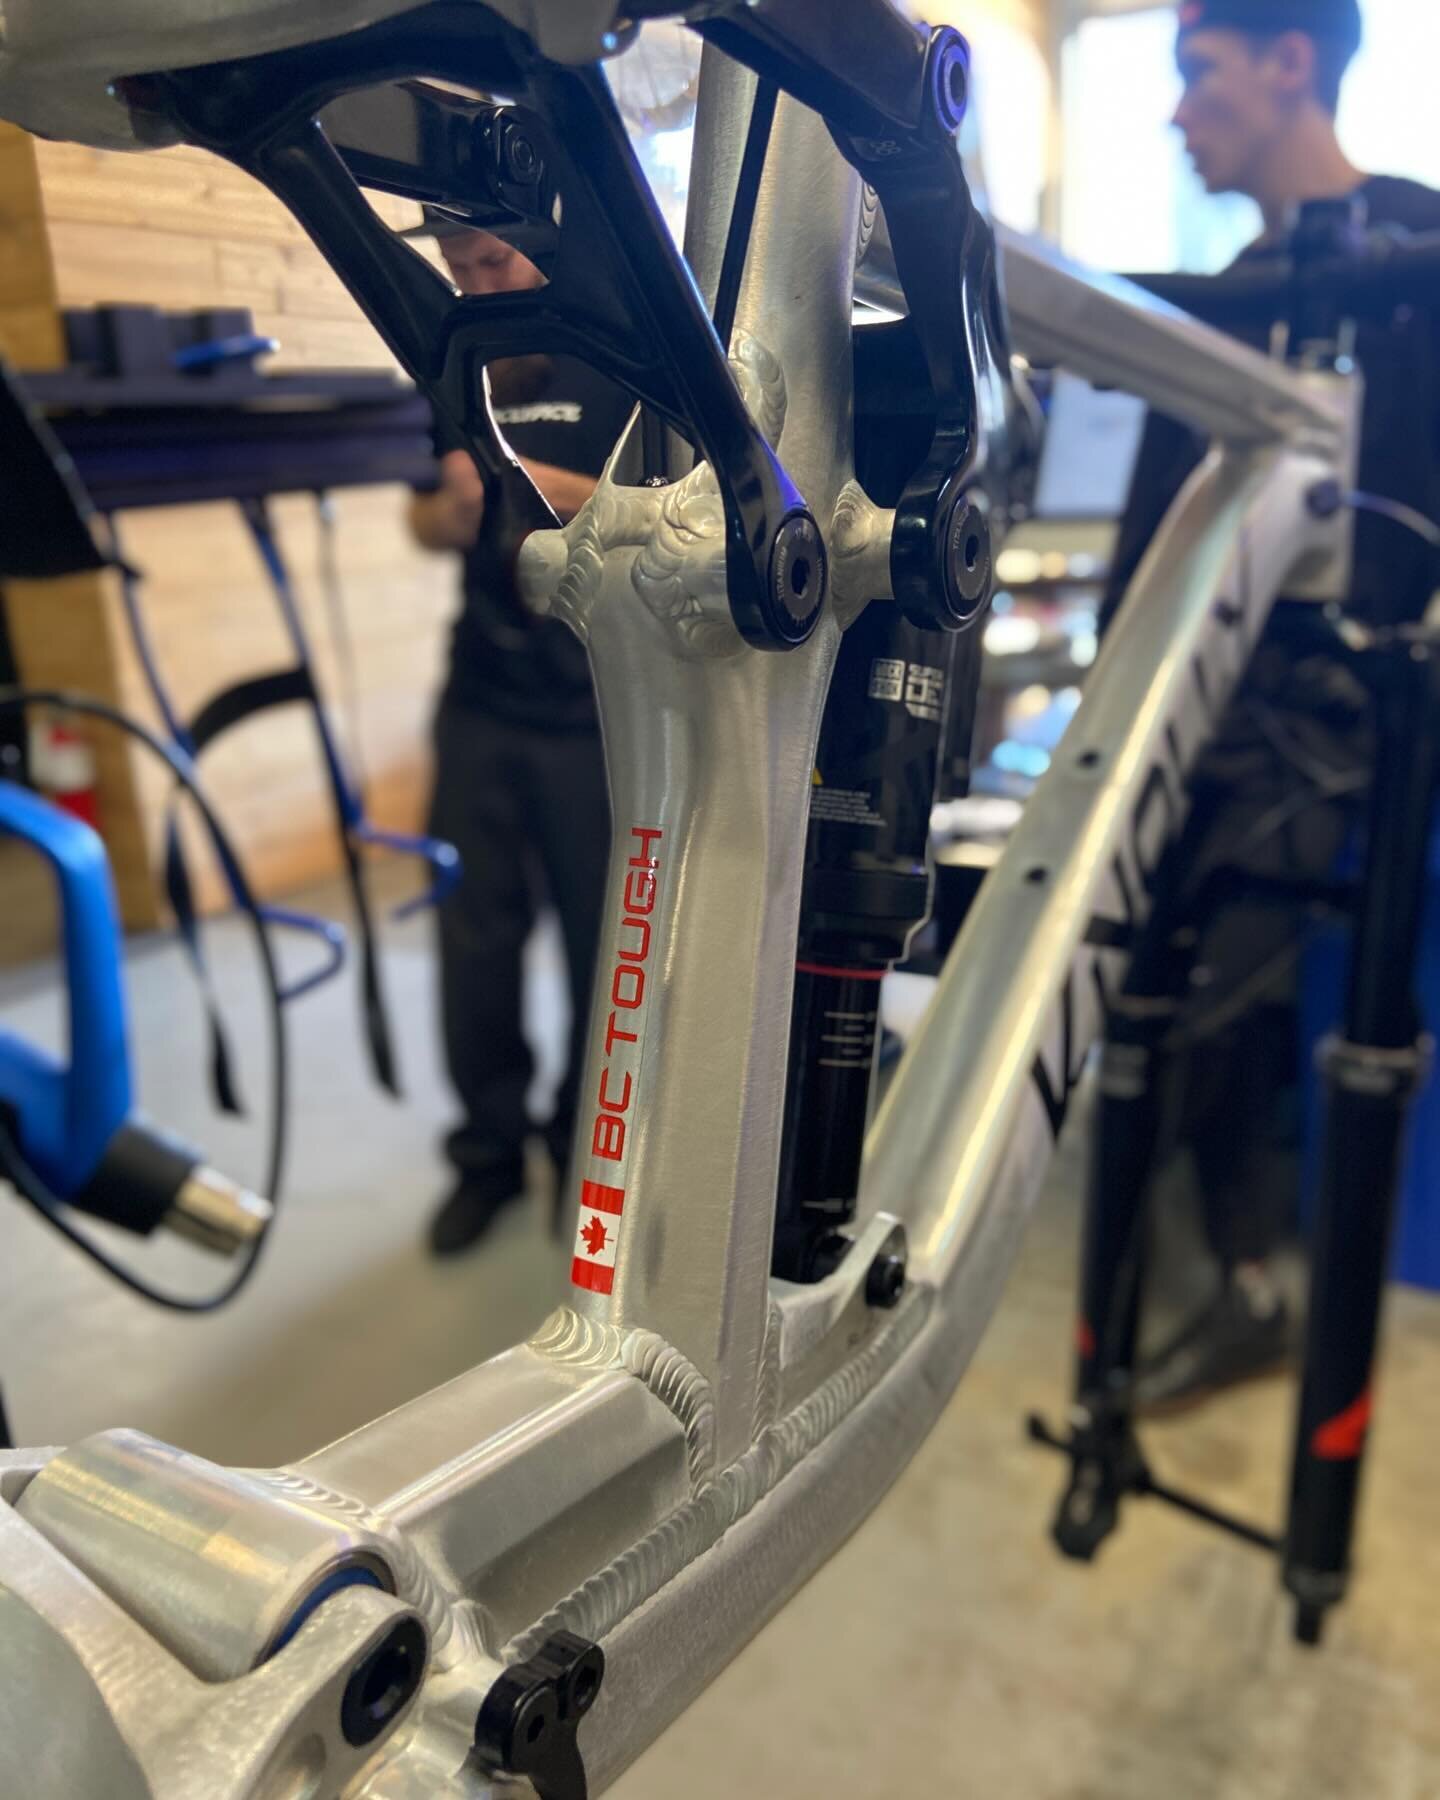 Fresh bike build! Who else strips the clutch on a brand new bike?? No matter the price or spec, we always go above and beyond, so you can have the best new bike day 👌
.
.
.
.
#knollybikes #newbike #mtb #mountainbike #bikelife #bikemechanic #bikeshop